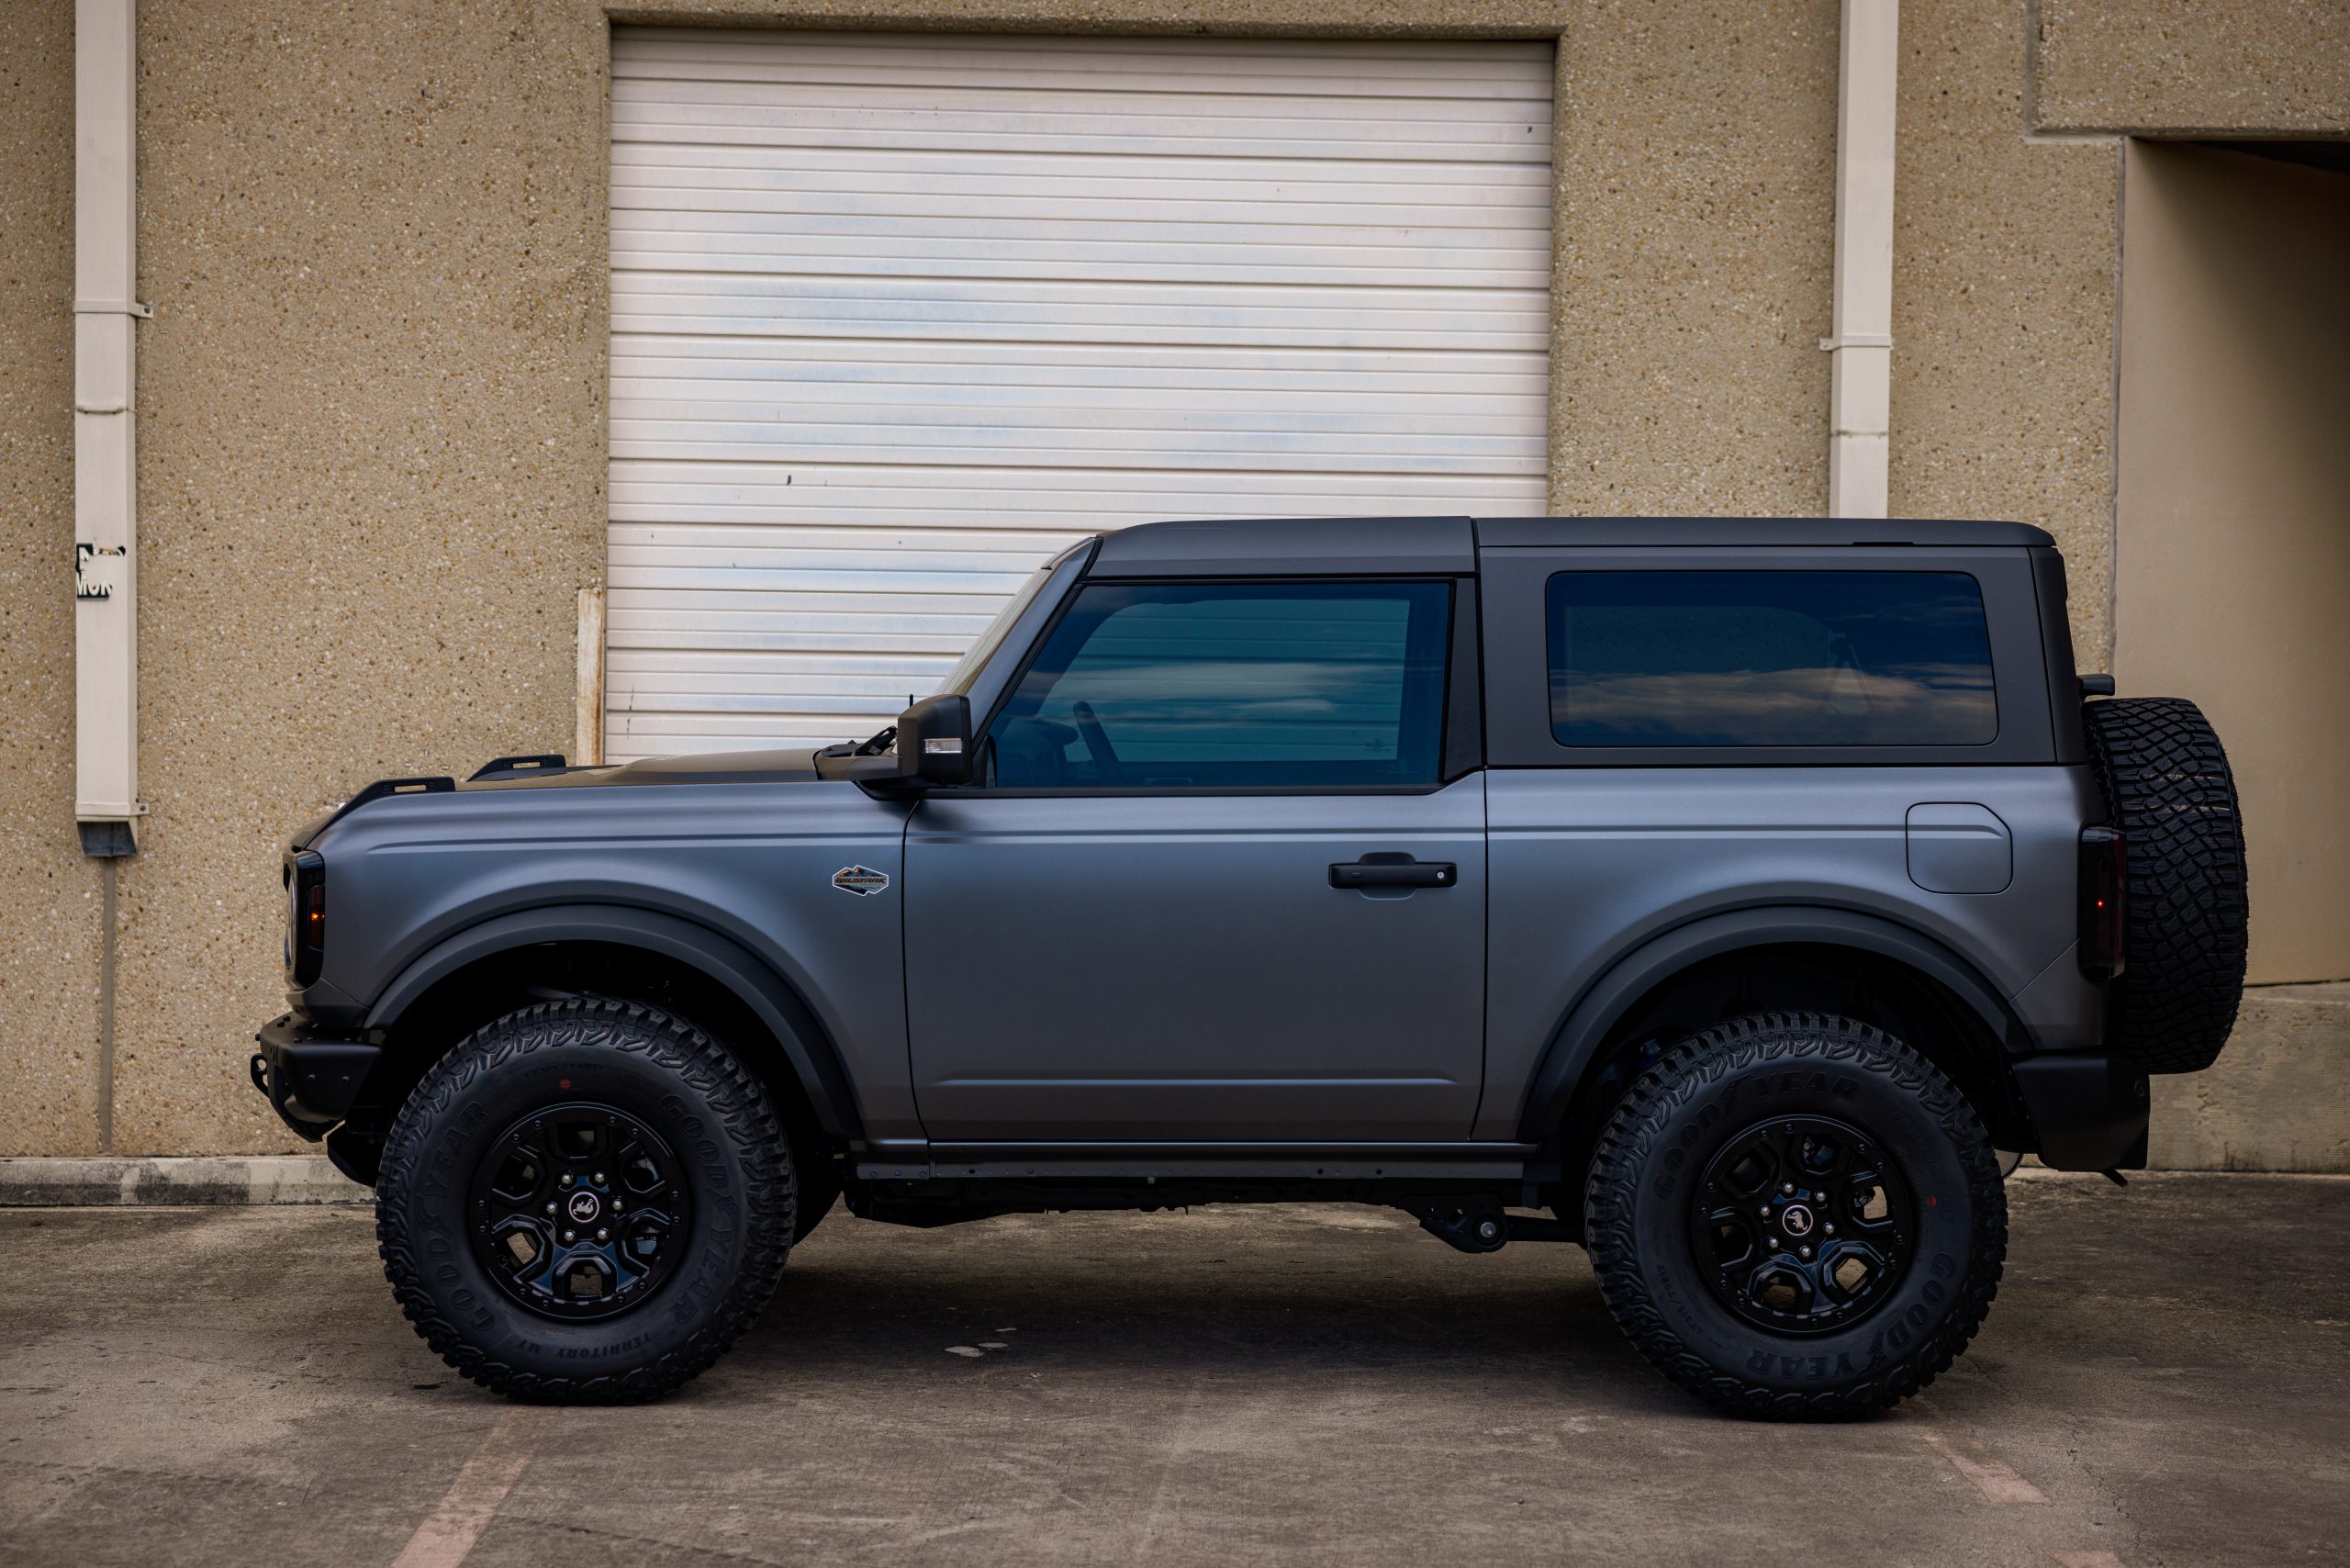 Matte Paint Protection Film Gives Ford Bronco A Menacing Look - Paint Protection and Window Tint in San Antonio, Texas 7